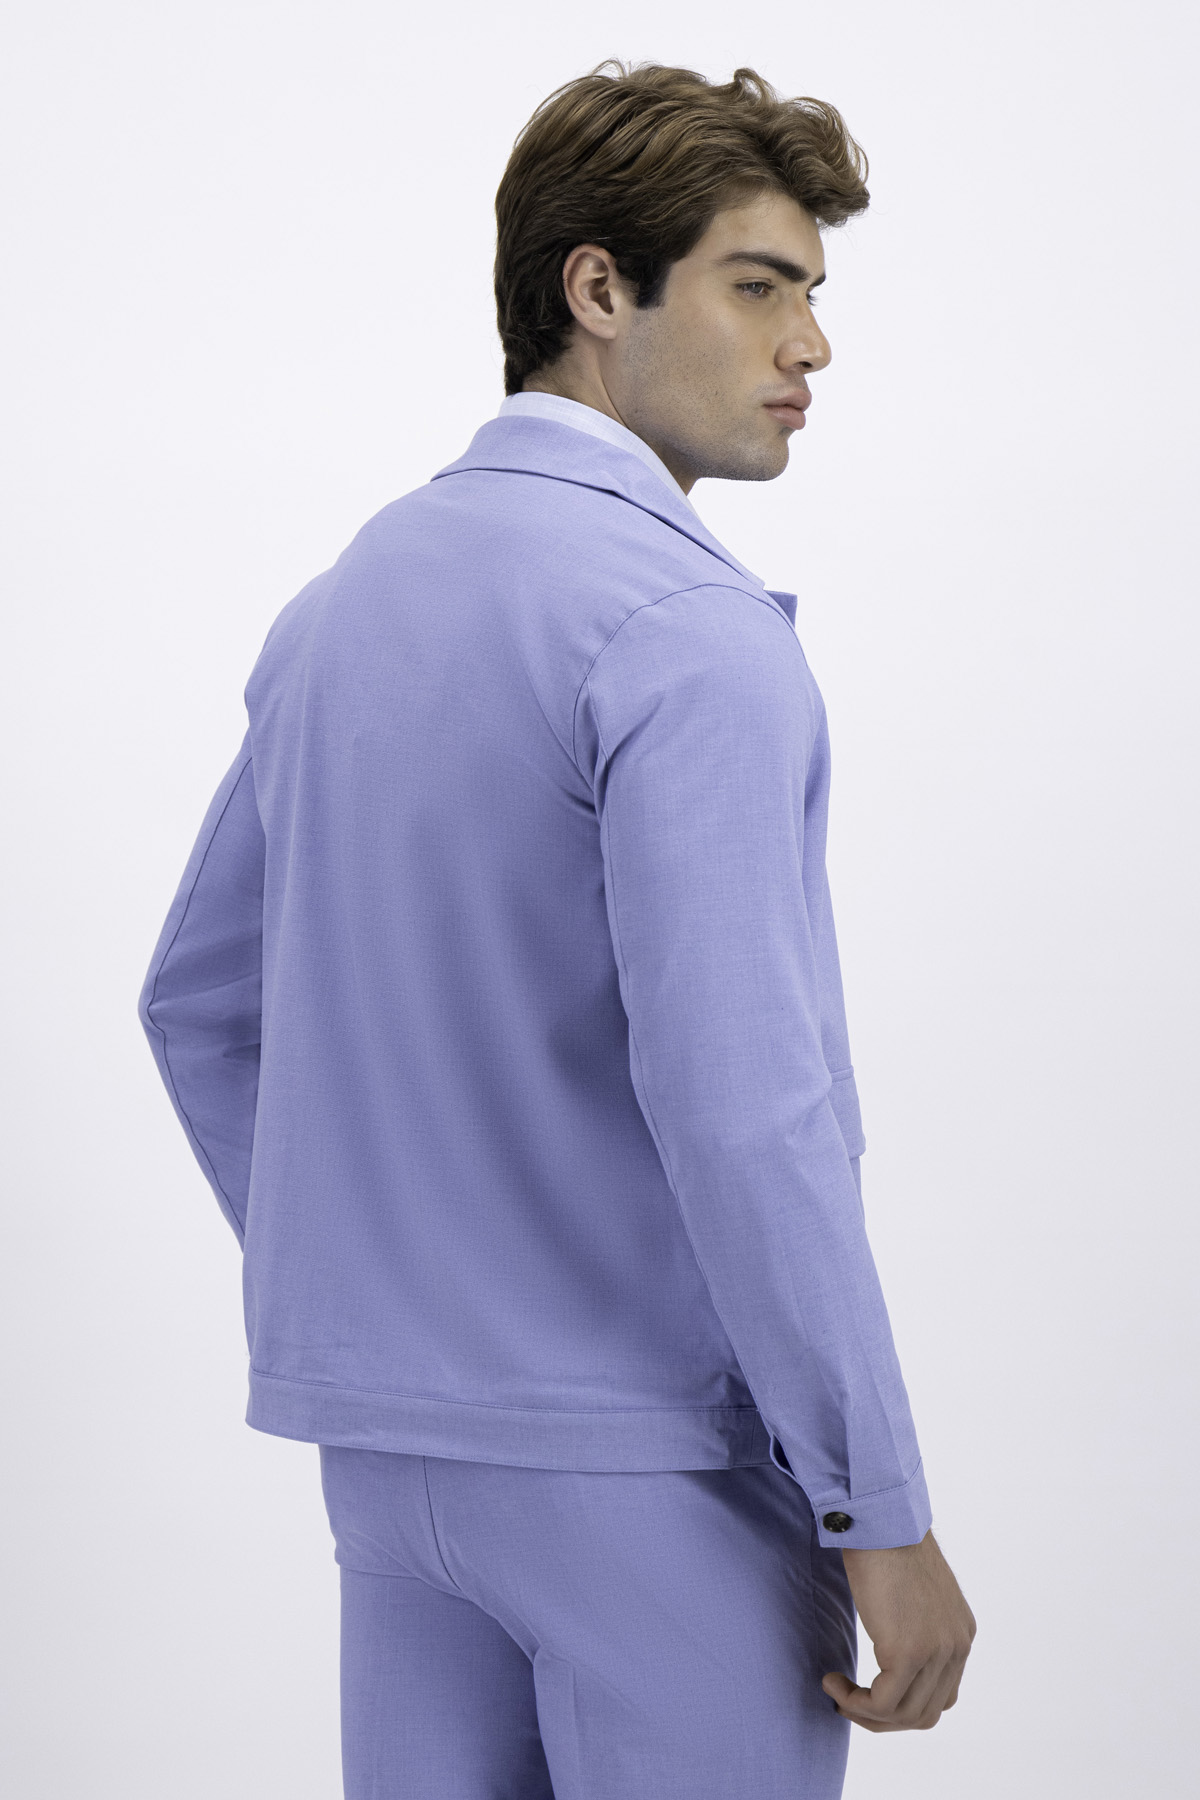 CHAMARRA CASUAL AZUL CLARO SLIM FIT LMENTAL image number null